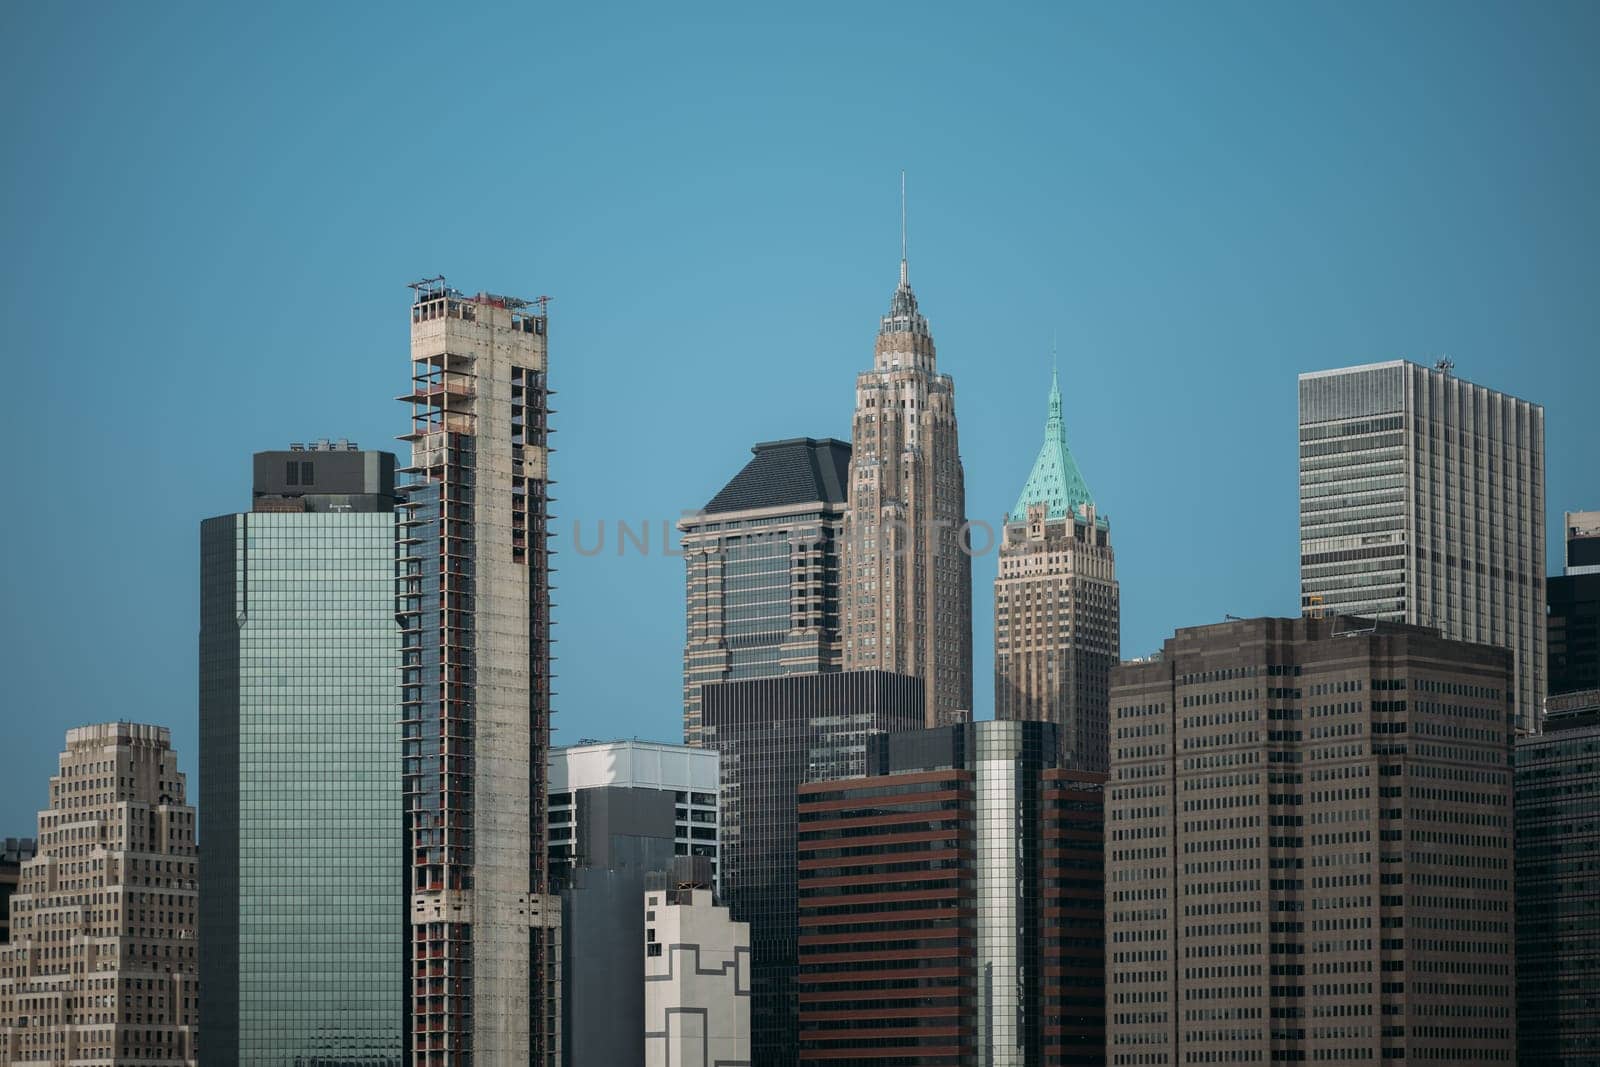 View of the stunning New York City skyline featuring diverse skyscrapers and modern high-rise buildings against a clear blue sky.